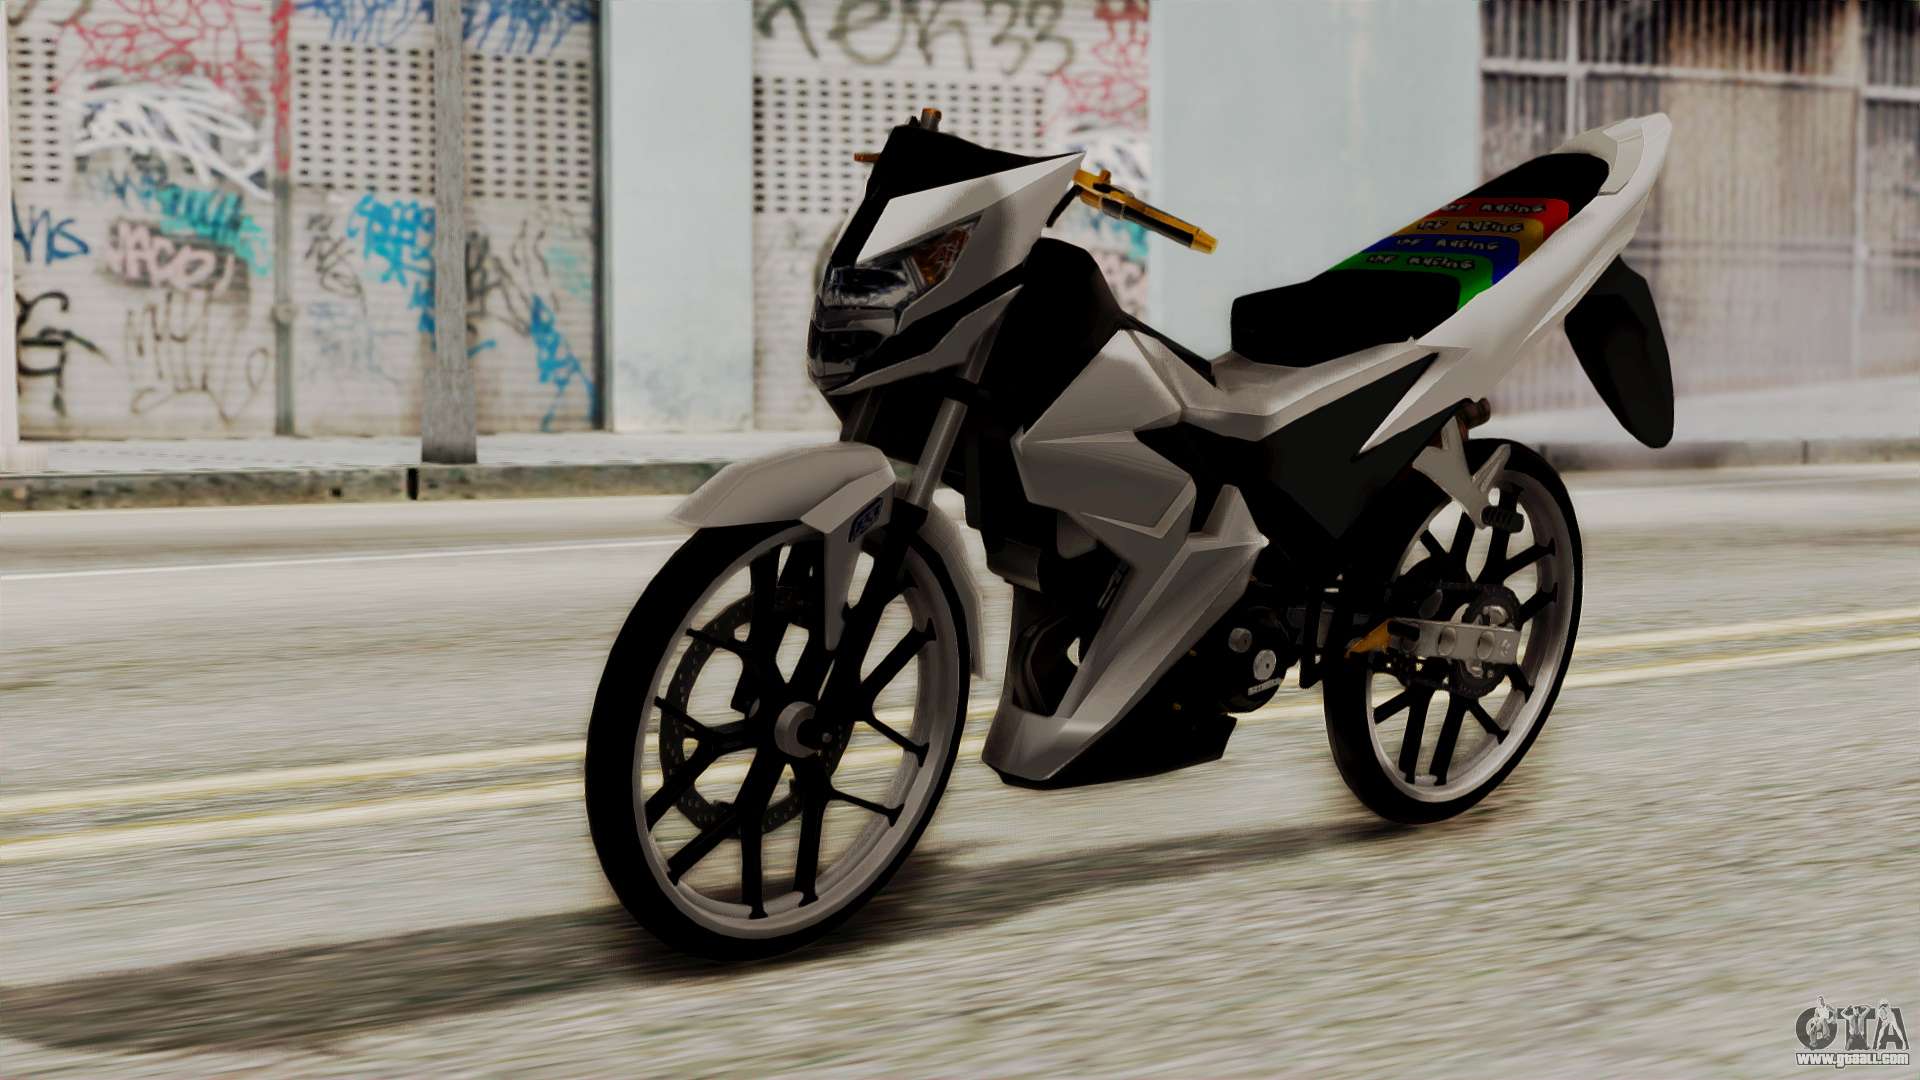 Bf-400 replacement for GTA San Andreas